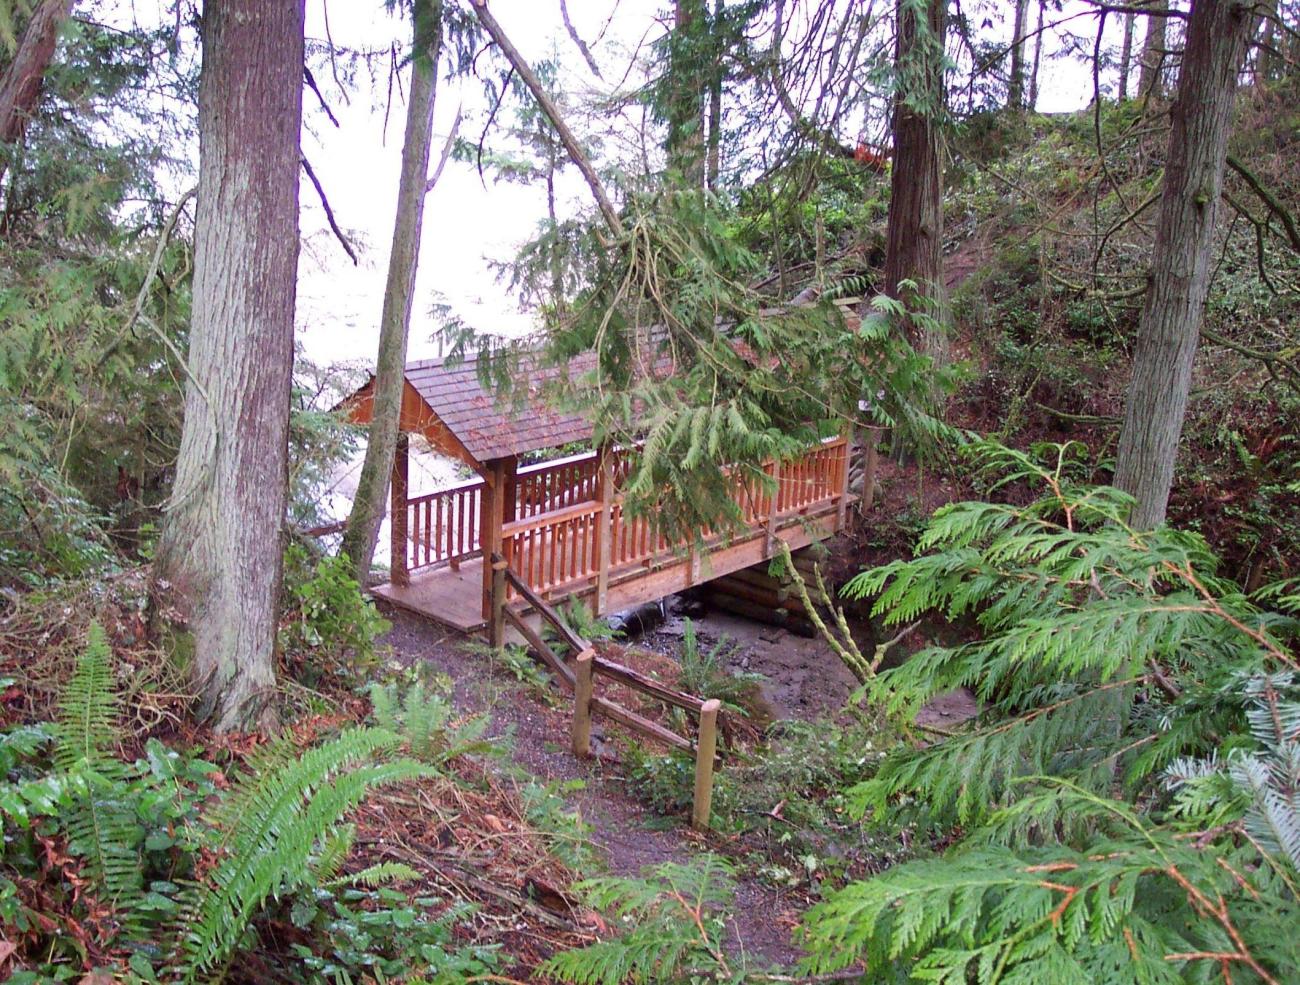 Covered pedestrian bridge sits in a stand of forest.